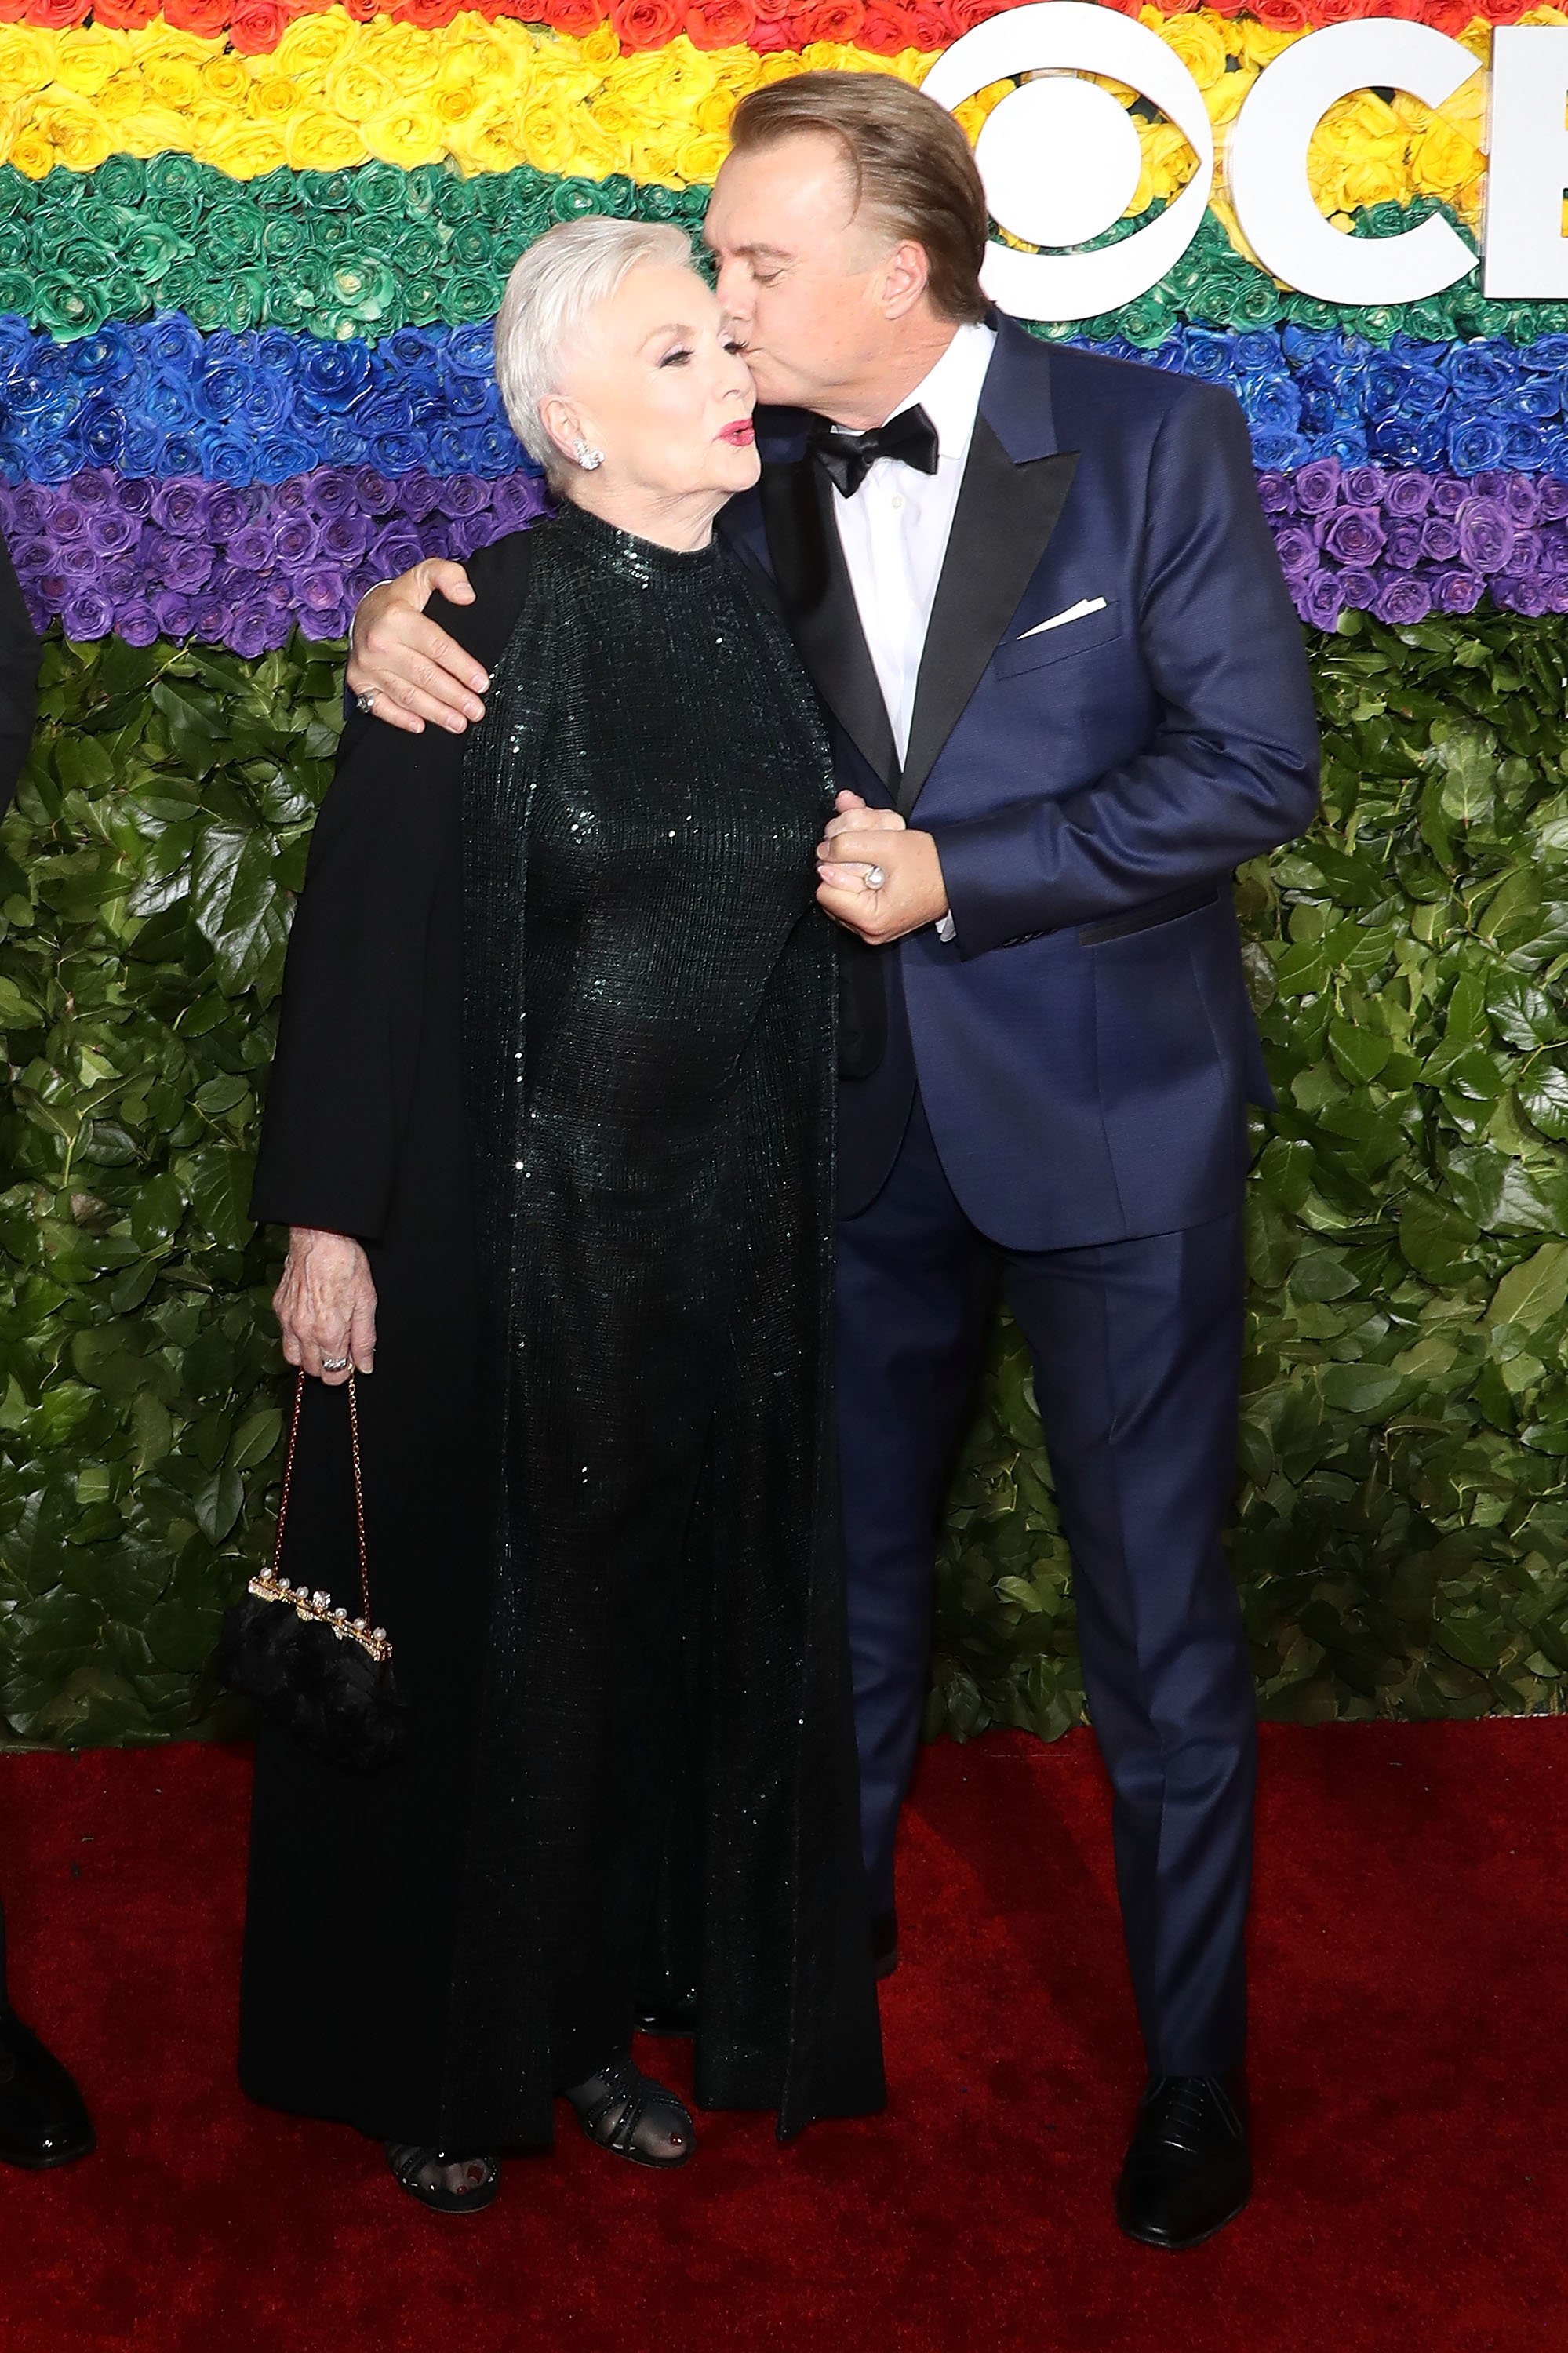 Shirley Jones and her son Shaun Cassidy attend the 2019 Tony Awards at Radio City Music Hall on June 9, 2019 in New York City. | Source: Getty Images